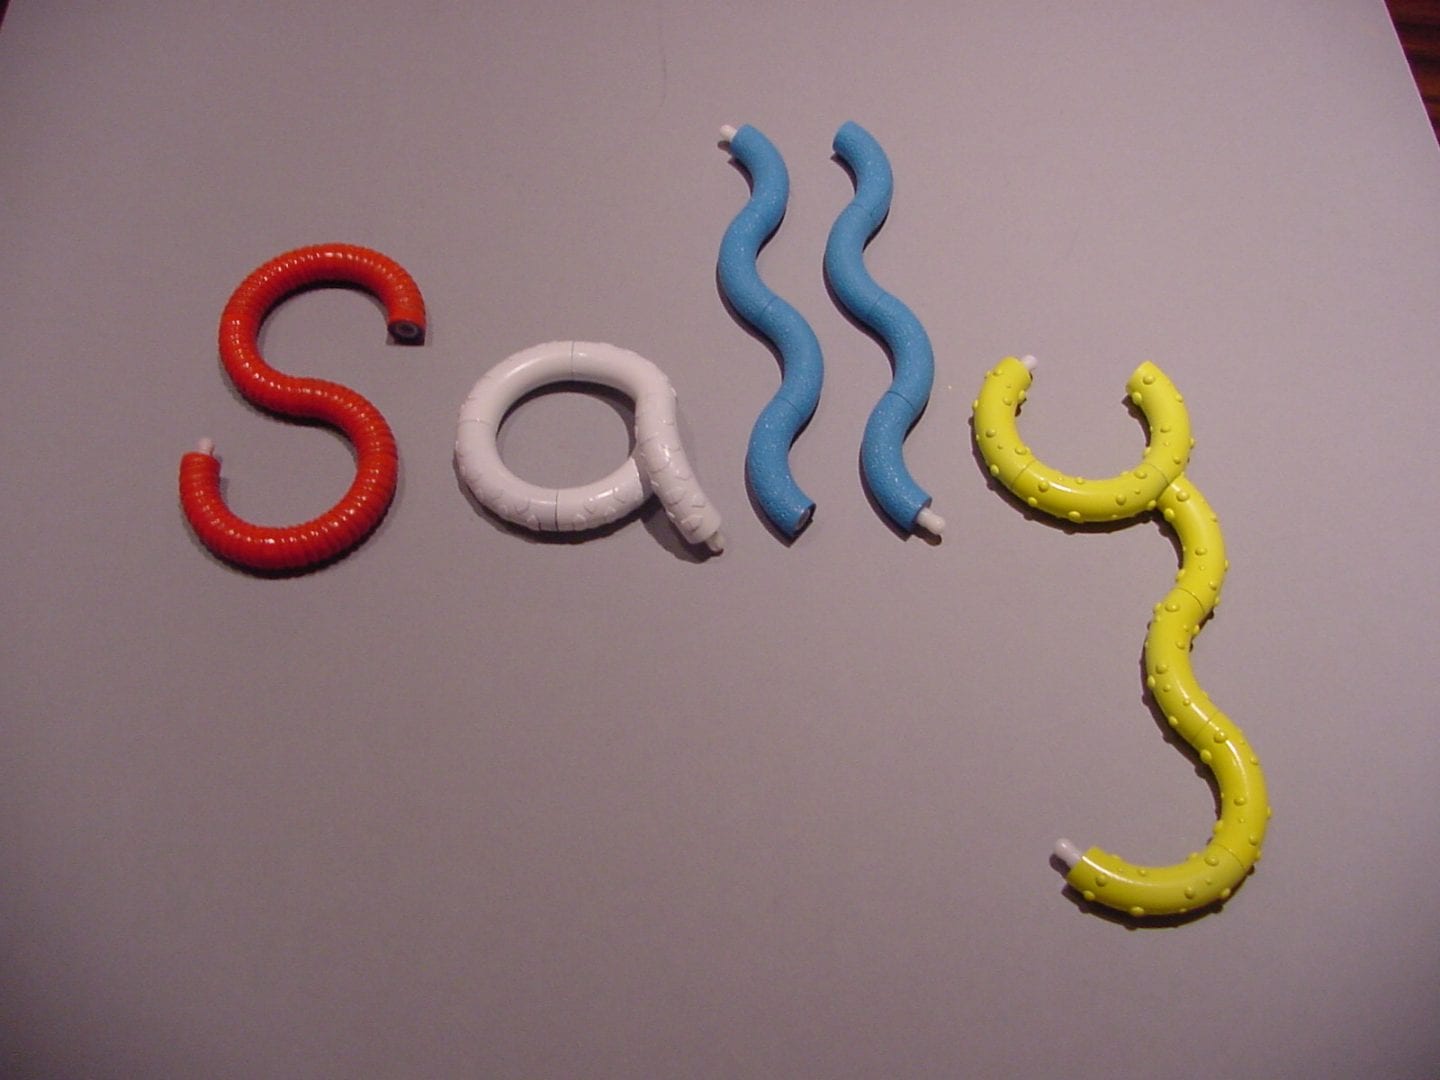 photo of tangle toys spelling out the name "sally" on a table top